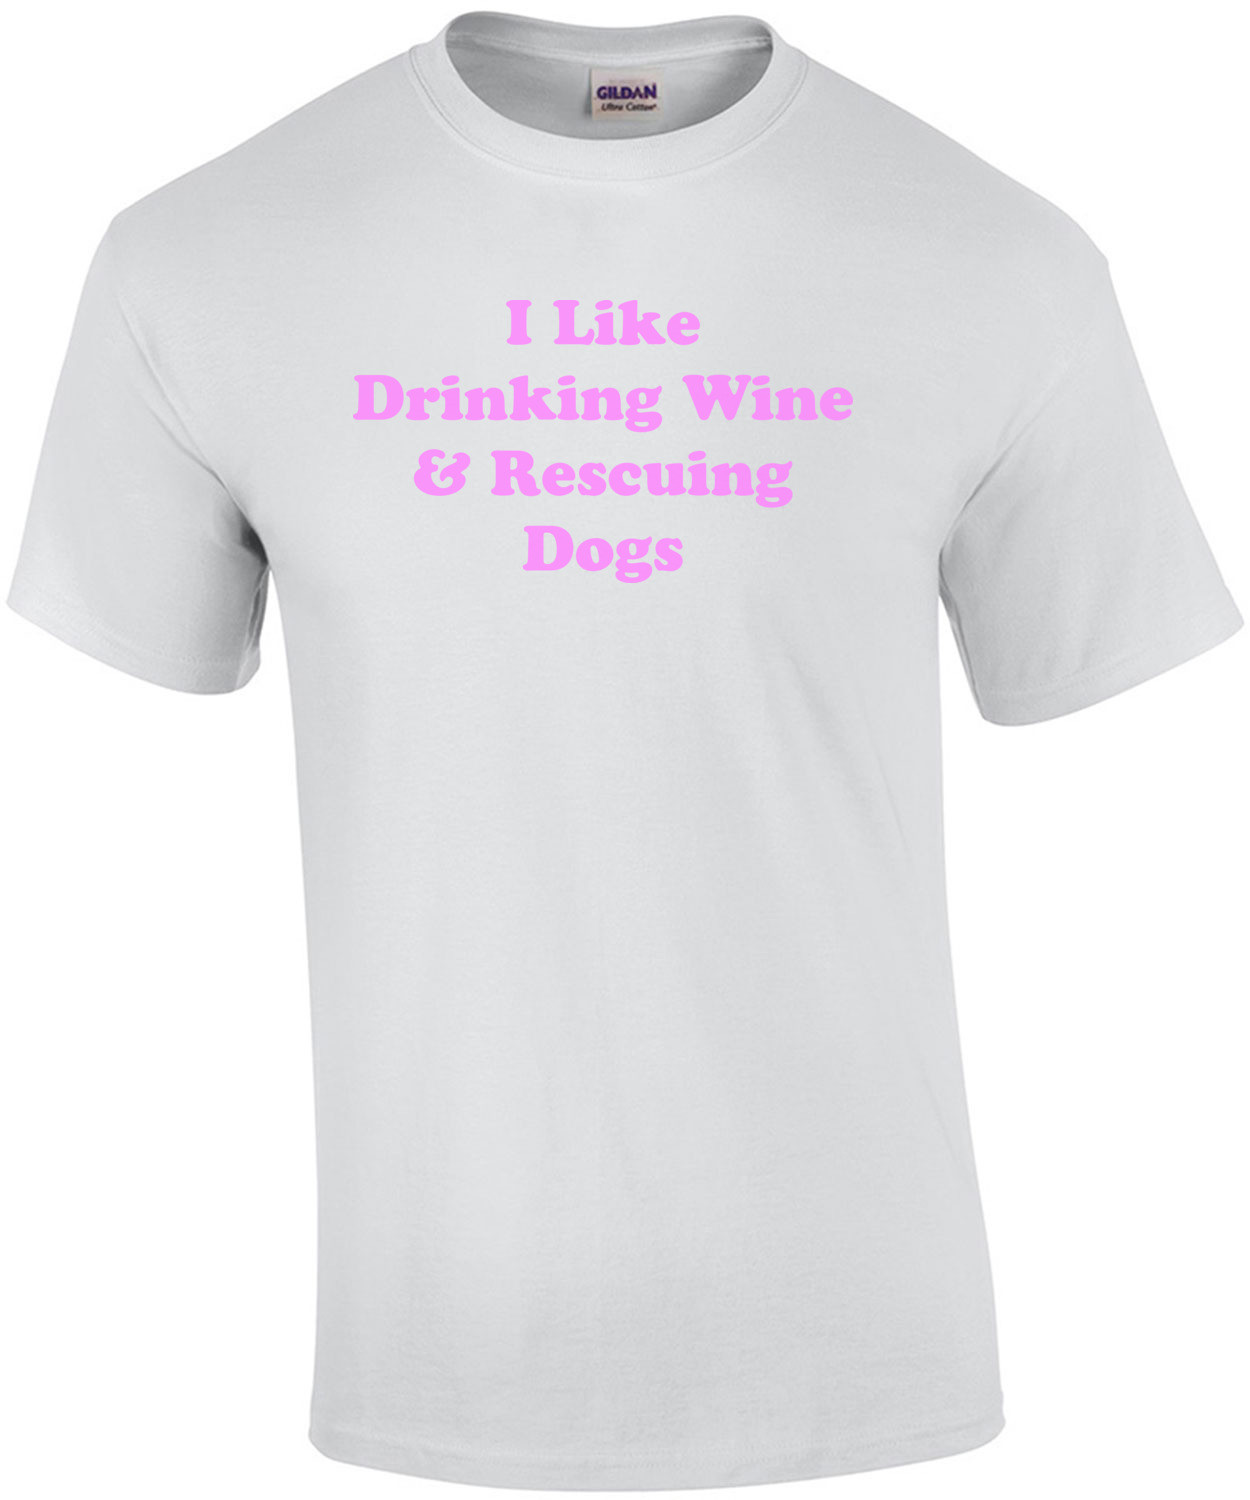 I Like Drinking Wine & Rescuing Dogs 2 Shirt